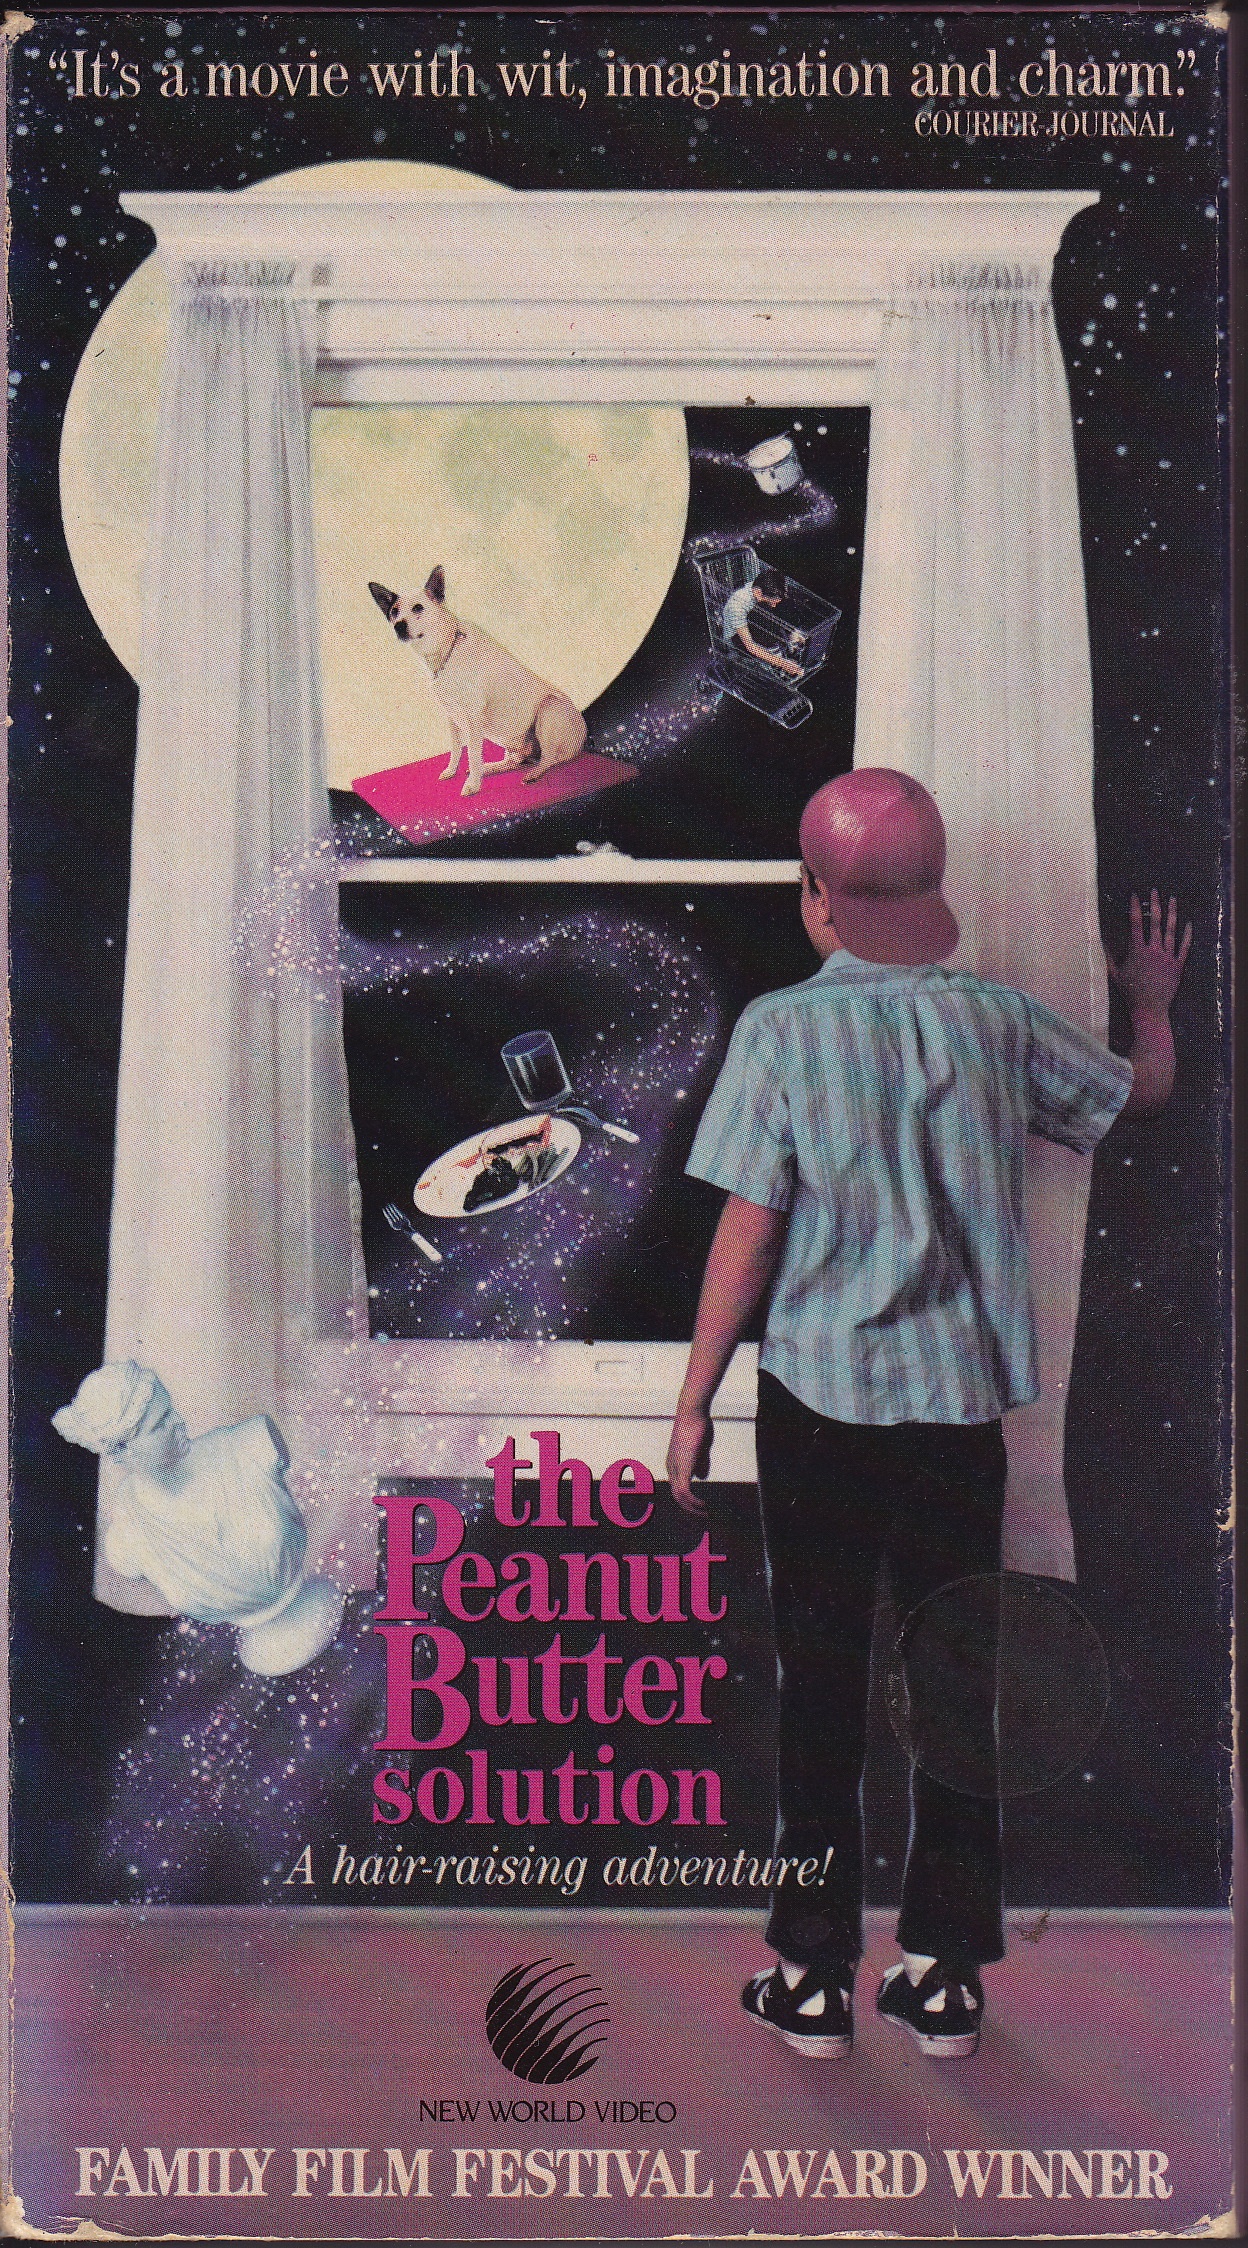 COLLECTING VHS: The Peanut Butter Solution (1985) 